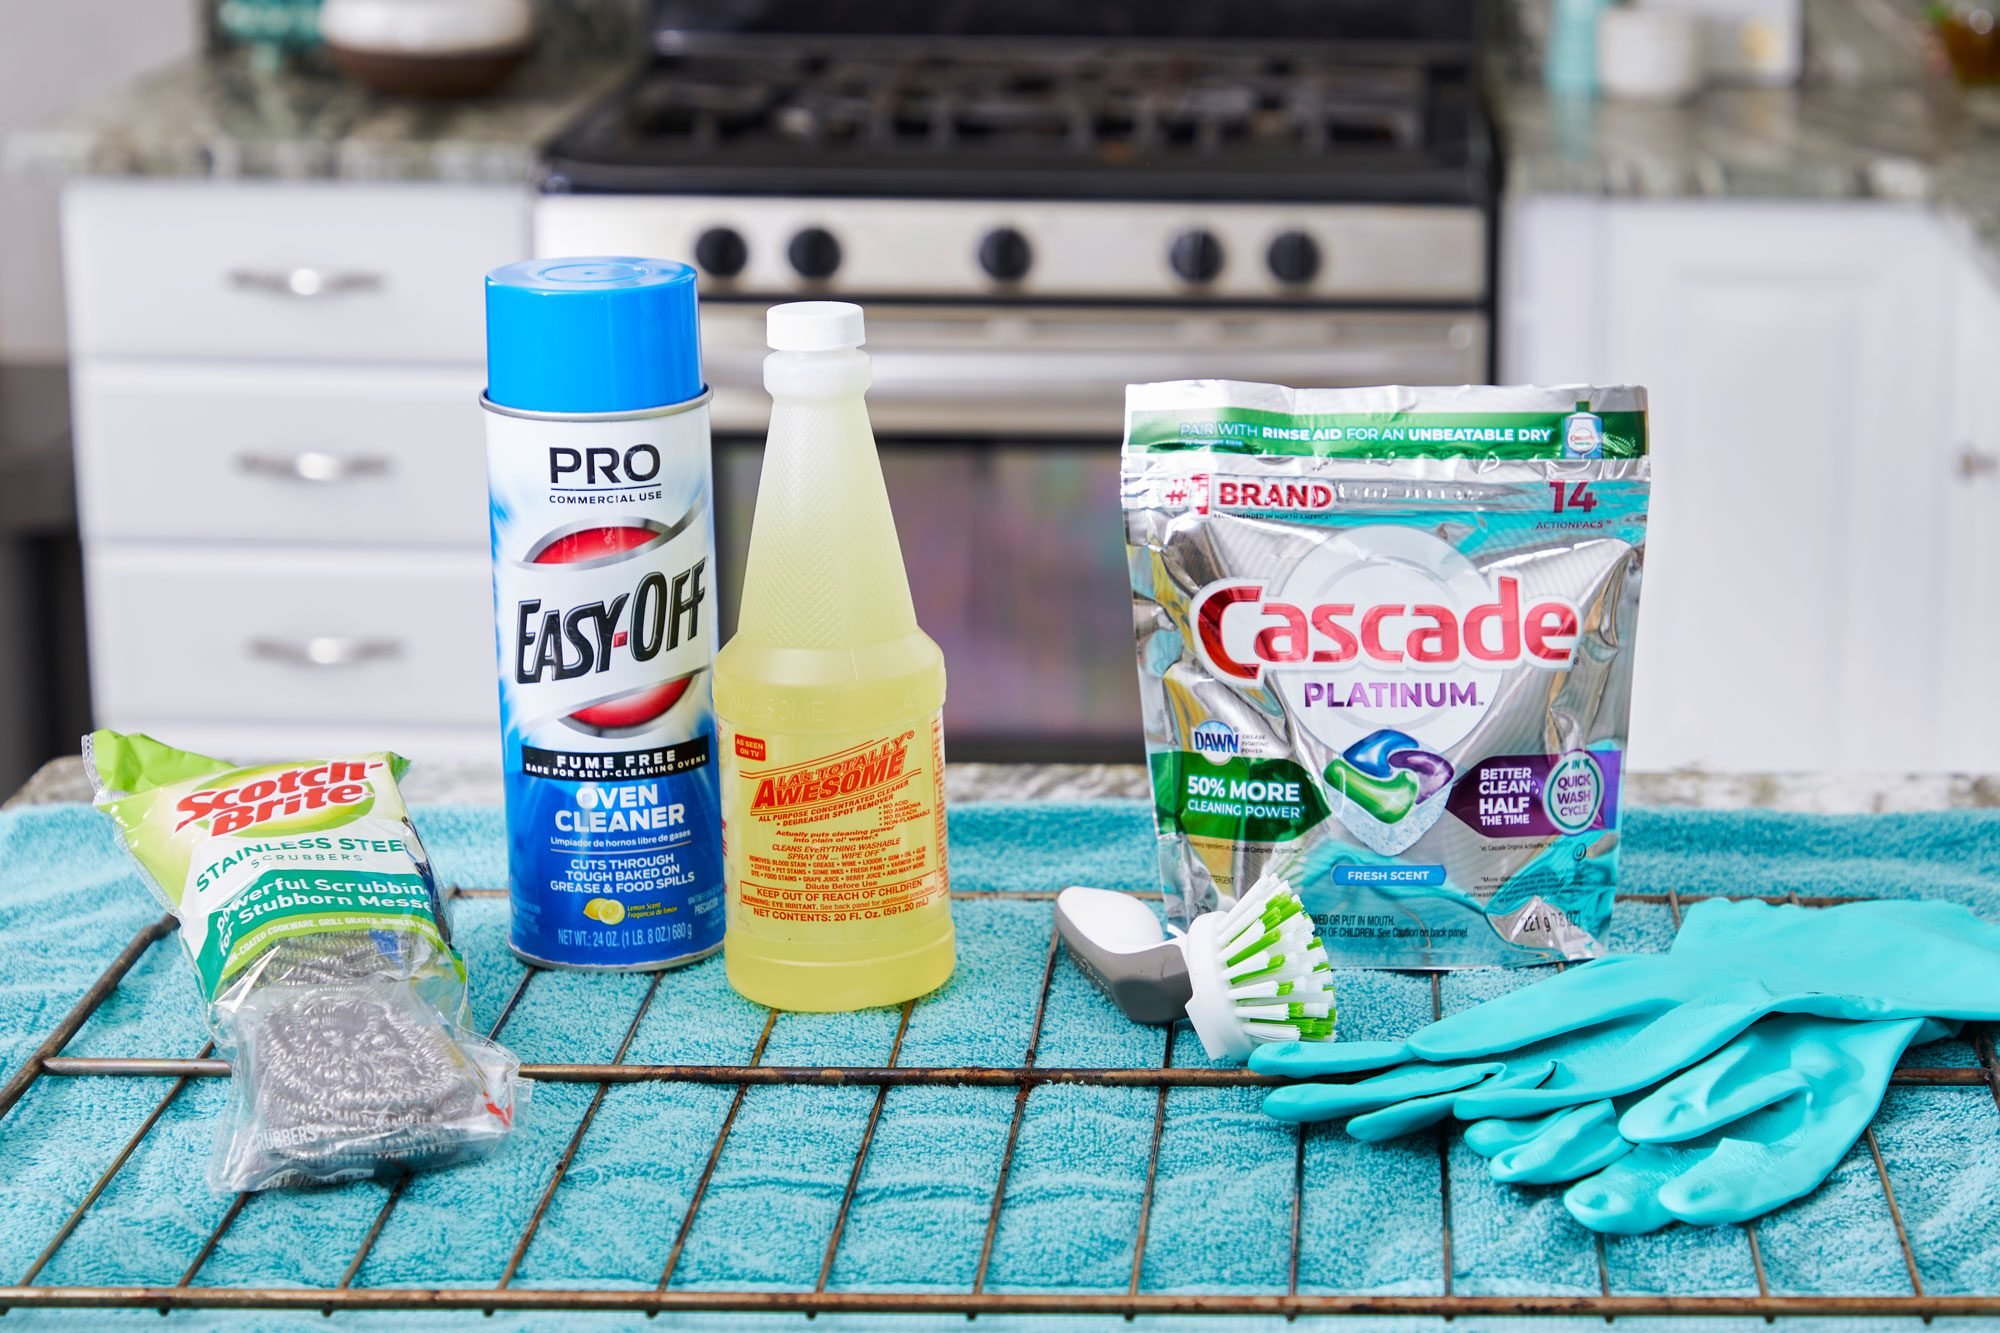 5 easy ways to keep your baking equipment clean